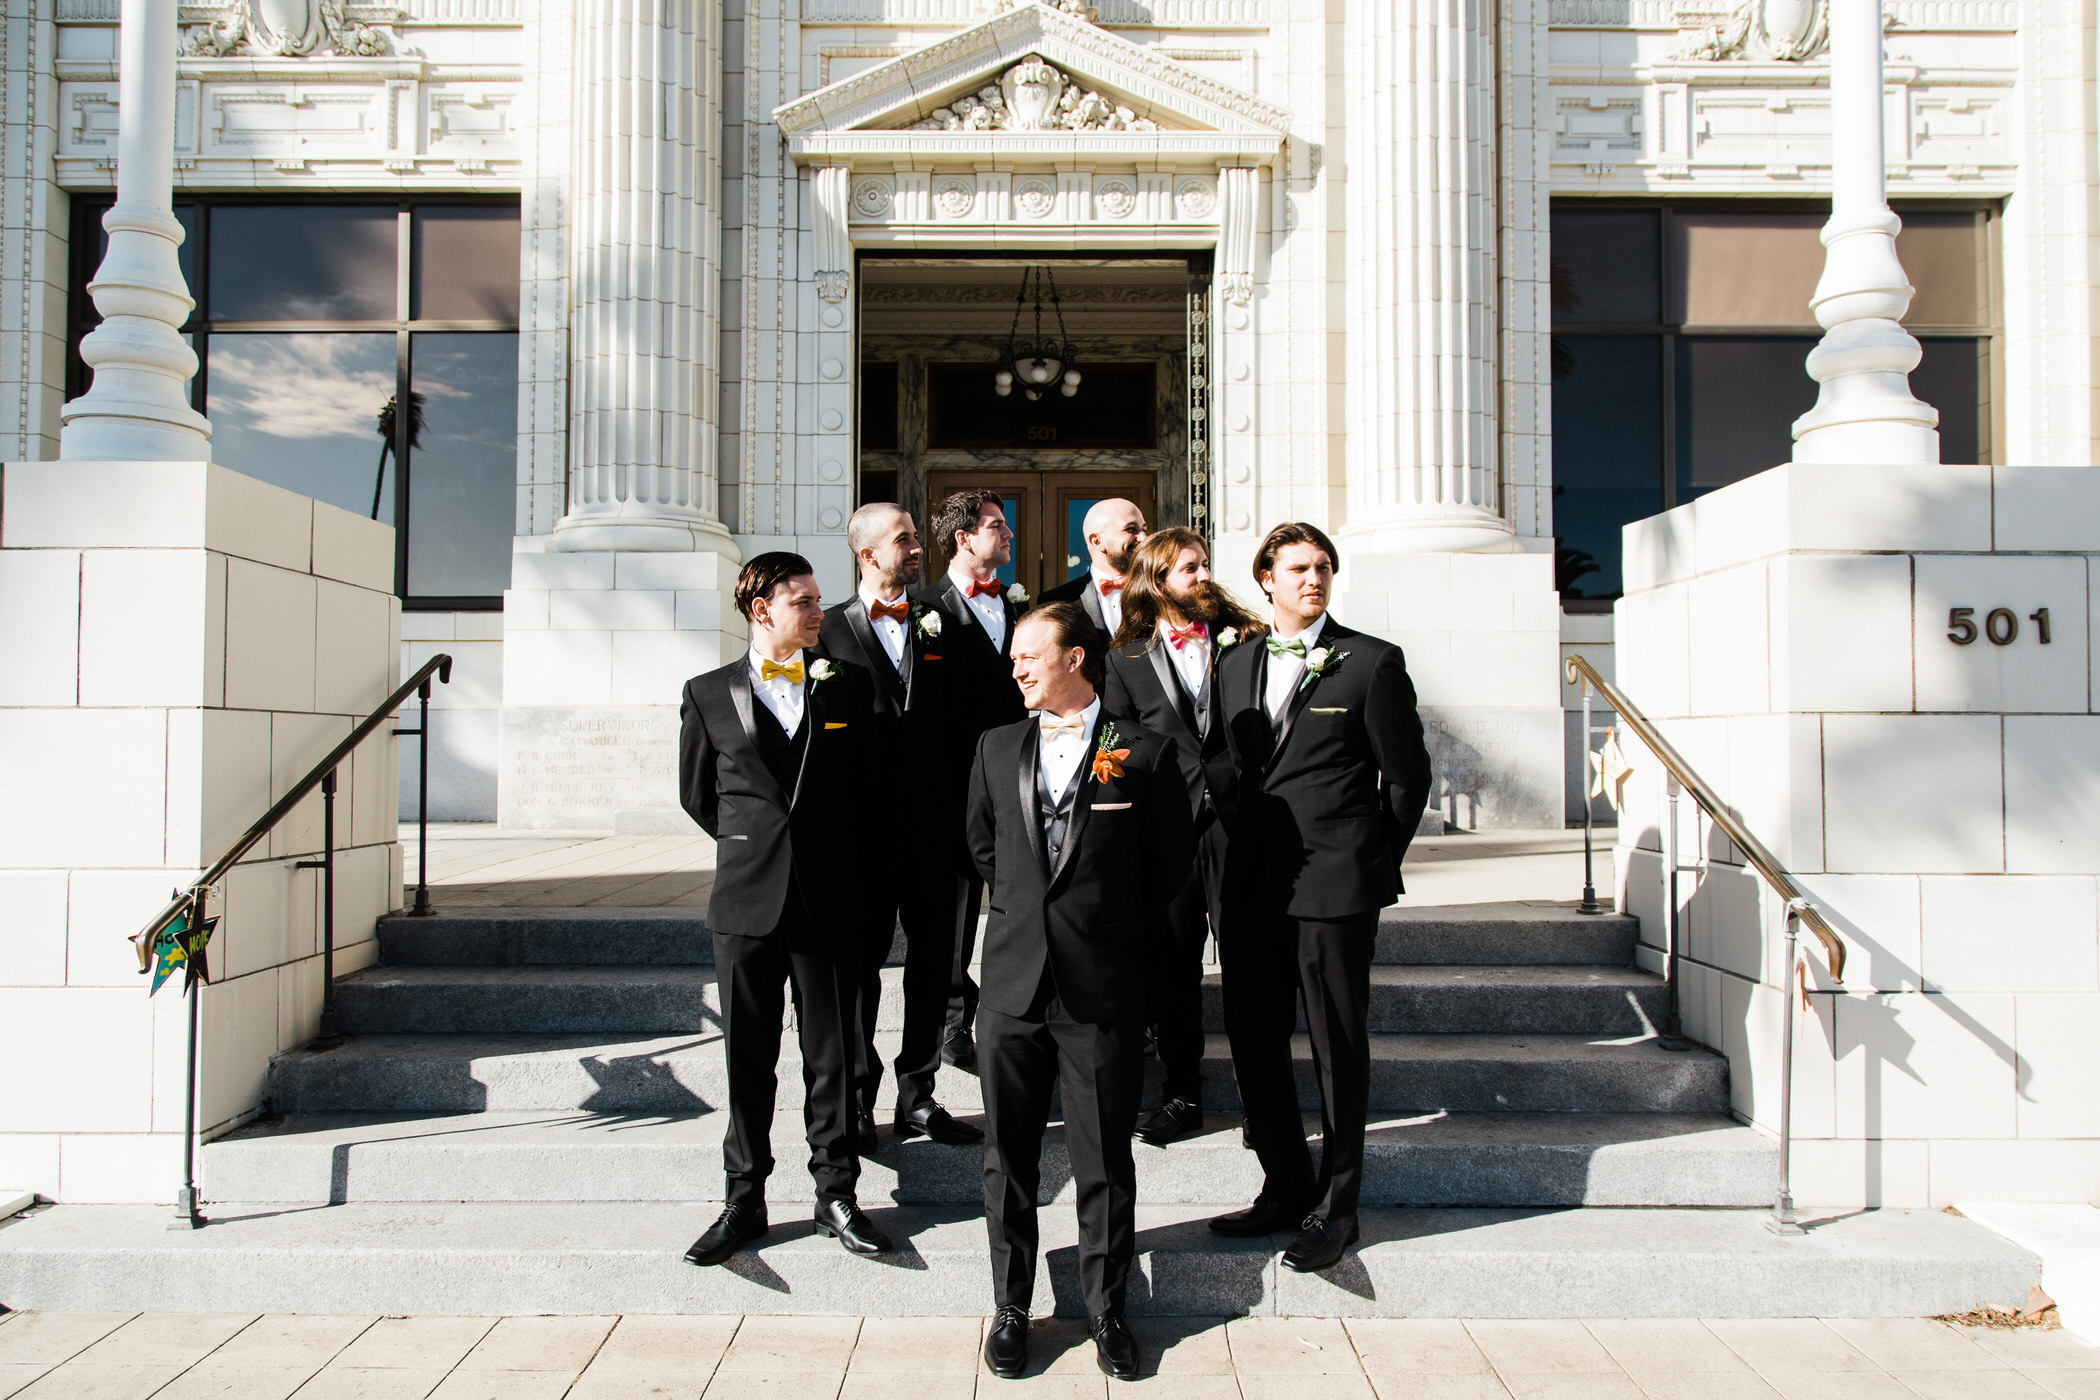  And then the groomsmen just KILLED IT! Anyone getting Reservoir Dogs vibes? Just me? 